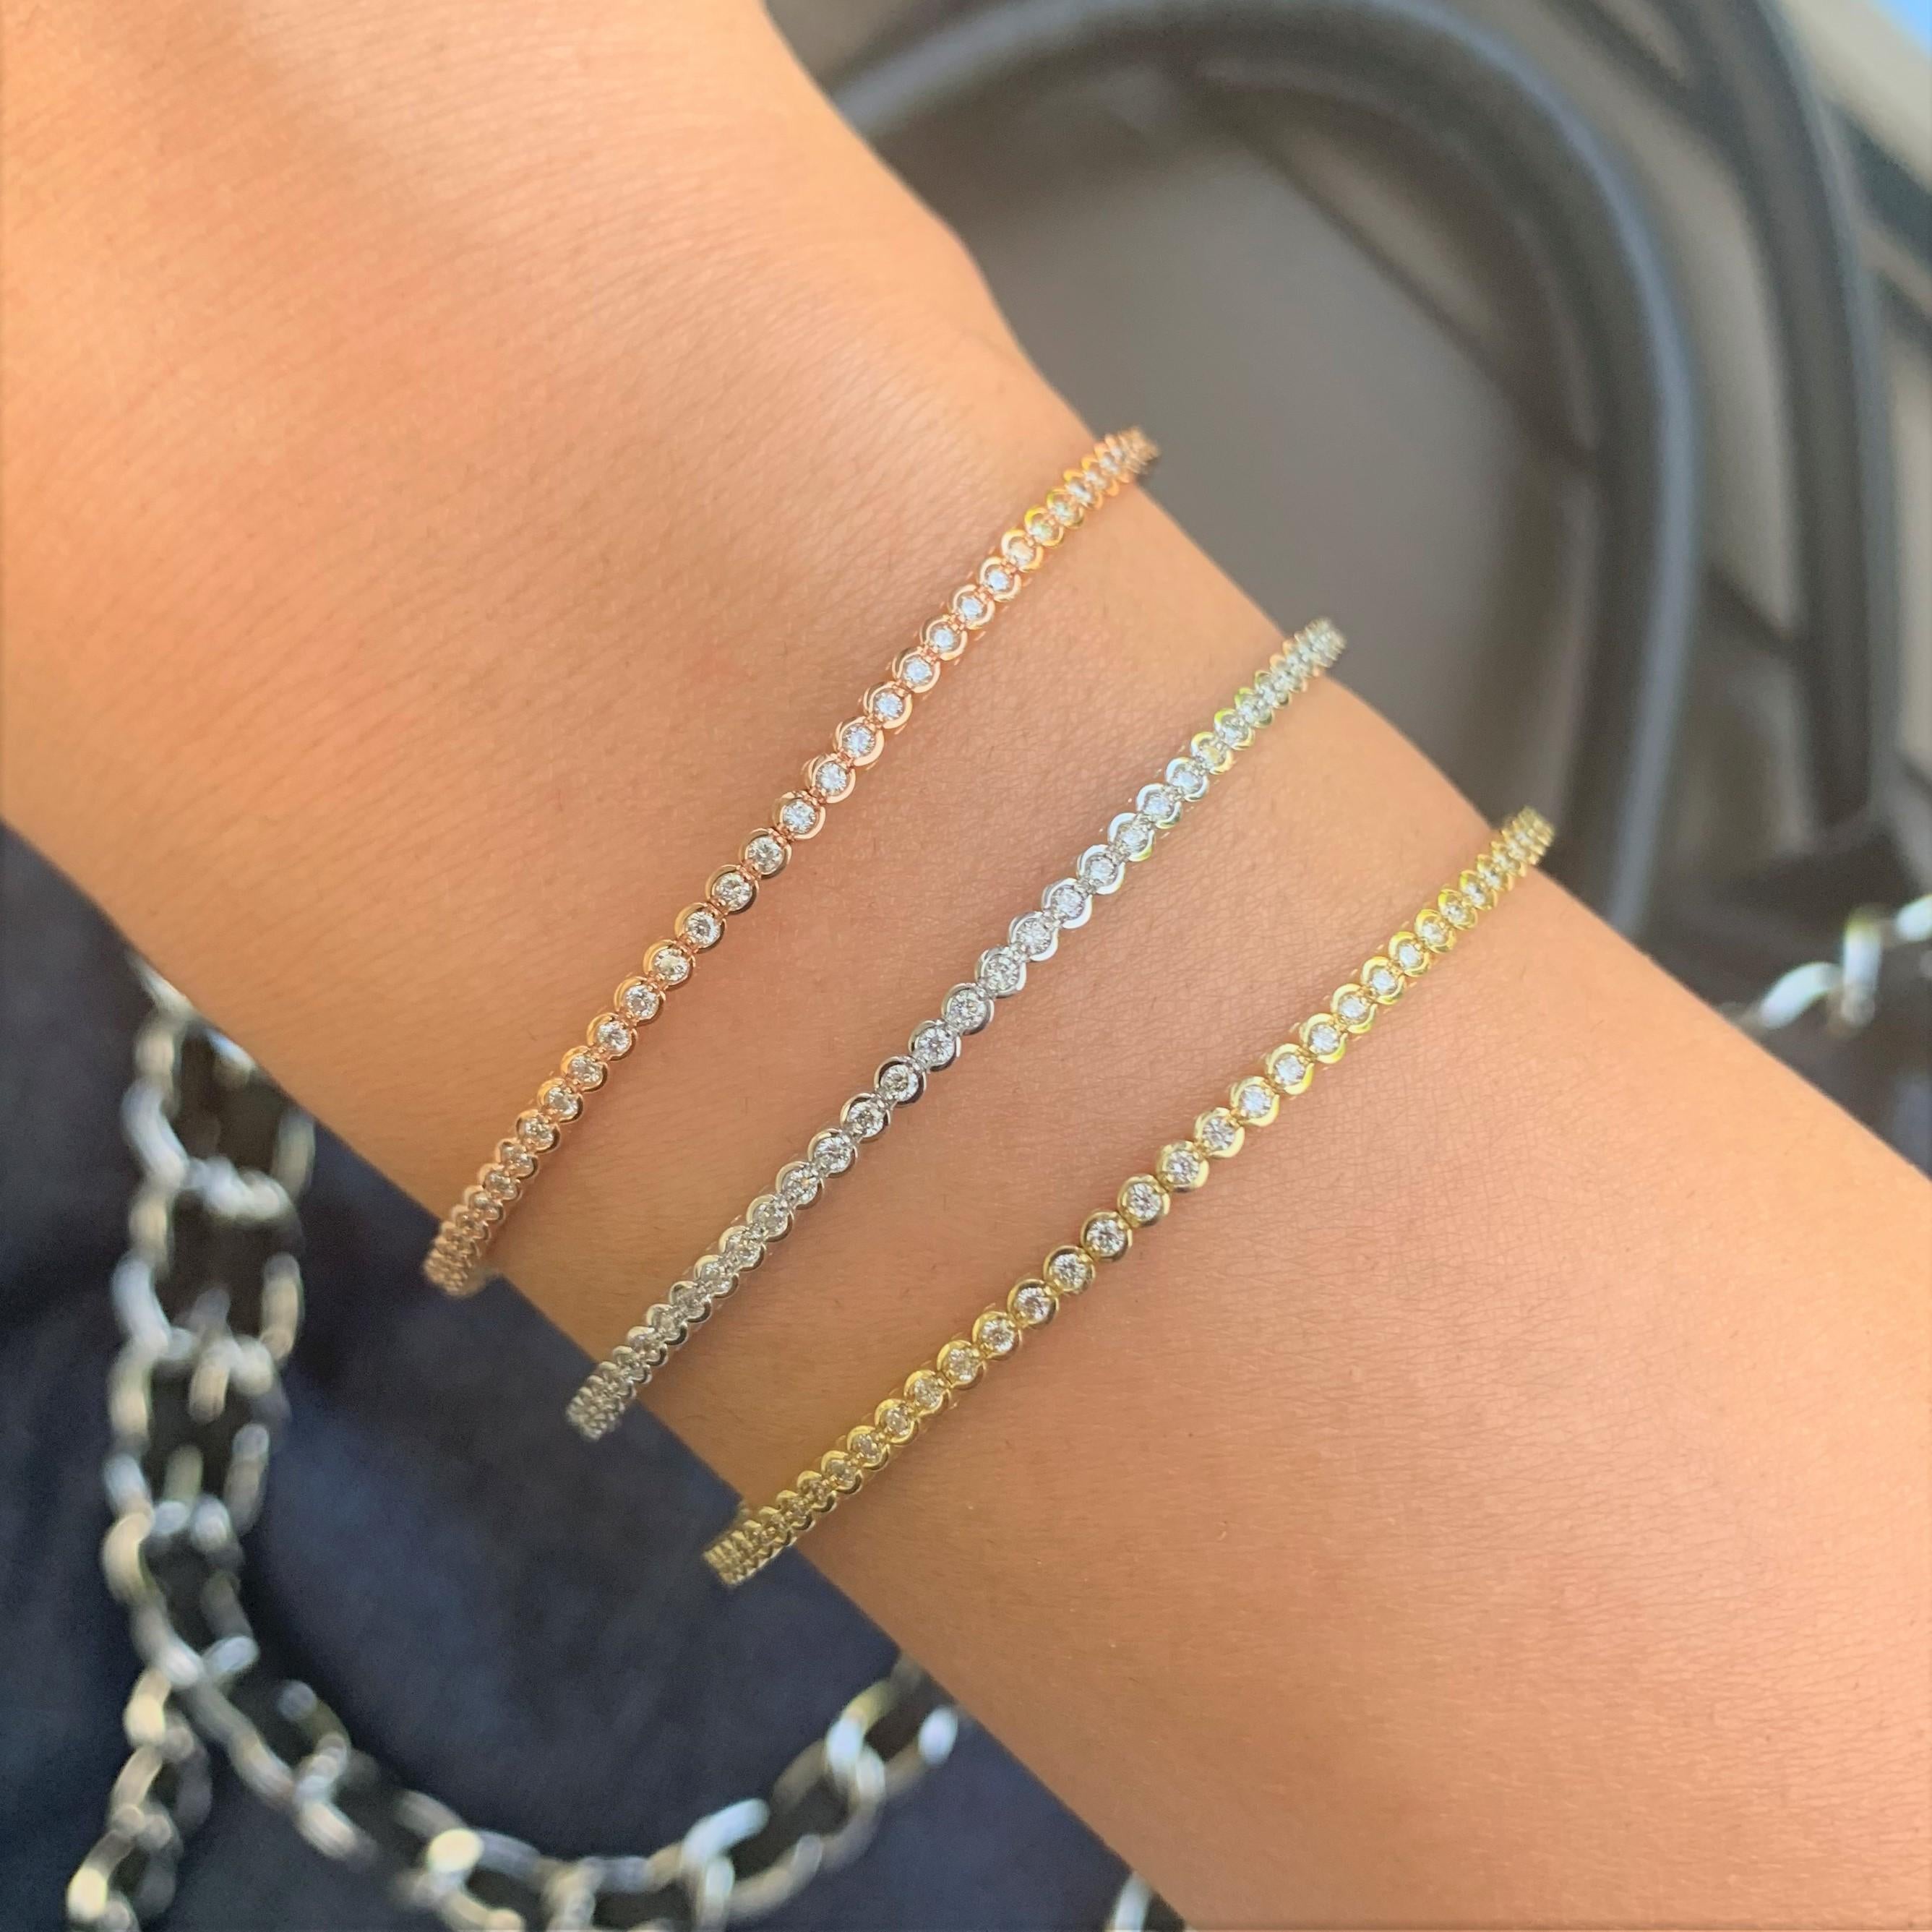 Quality Stackable Bangle: Made from real 14k gold and 80 glittering white approximately 0.96 ct. Certified diamonds, featuring a single row of white diamonds flexible diameter for comfort with a color and clarity of GH-SI
 Surprise Your Loved One